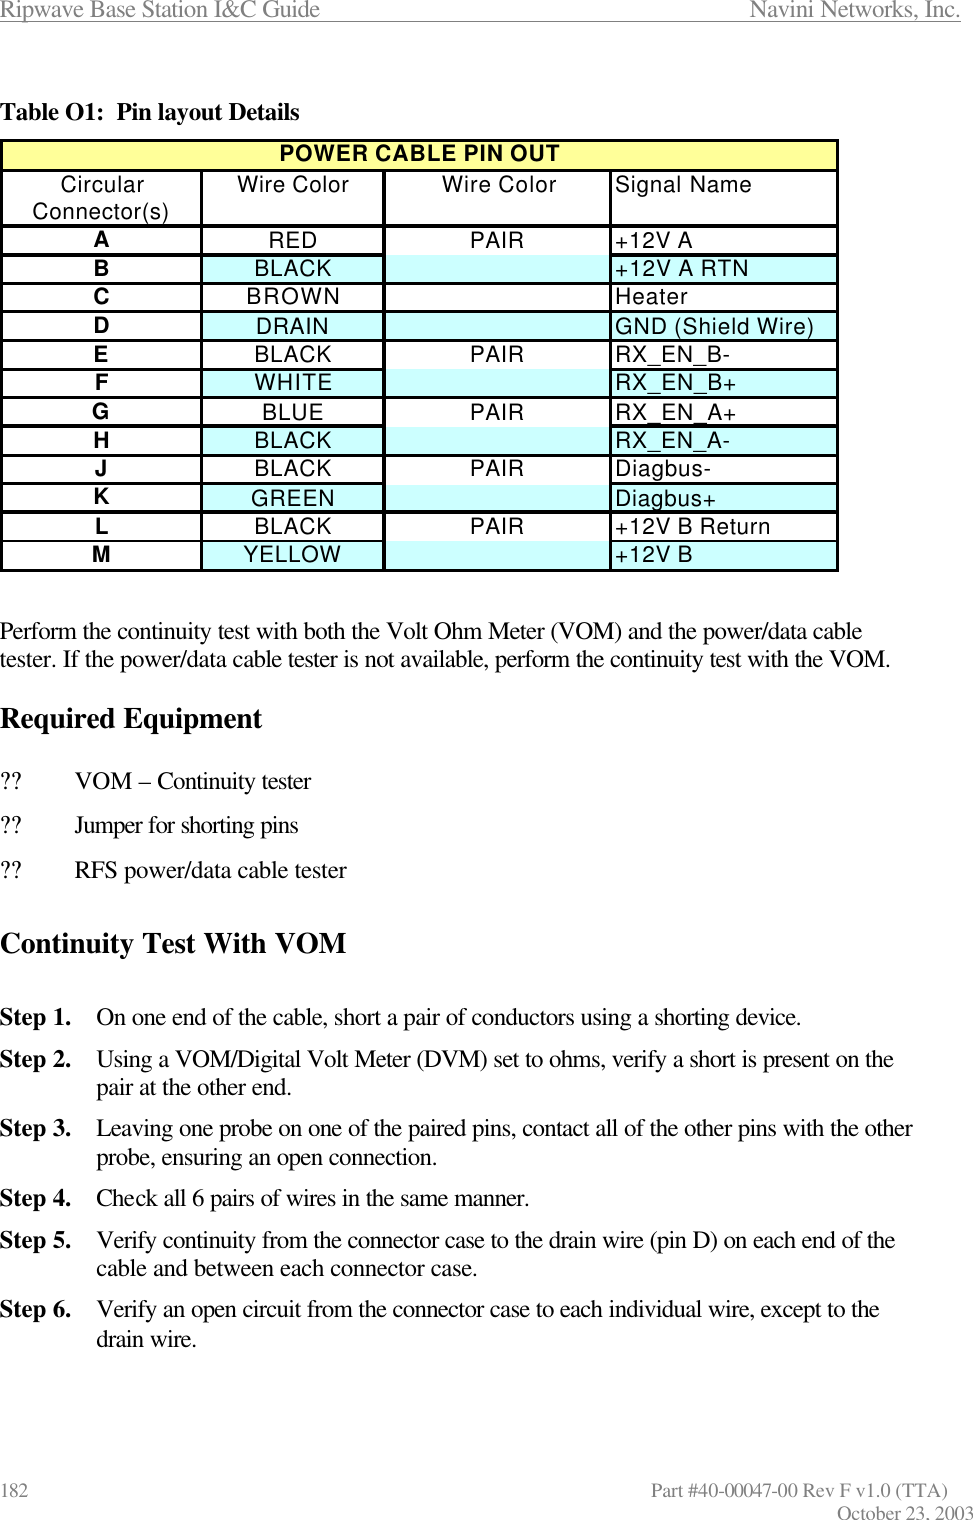 Ripwave Base Station I&amp;C Guide                      Navini Networks, Inc. 182                   Part #40-00047-00 Rev F v1.0 (TTA) October 23, 2003  Table O1:  Pin layout Details                  Perform the continuity test with both the Volt Ohm Meter (VOM) and the power/data cable tester. If the power/data cable tester is not available, perform the continuity test with the VOM.  Required Equipment  ?? VOM – Continuity tester ?? Jumper for shorting pins ?? RFS power/data cable tester  Continuity Test With VOM  Step 1. On one end of the cable, short a pair of conductors using a shorting device.  Step 2. Using a VOM/Digital Volt Meter (DVM) set to ohms, verify a short is present on the pair at the other end.  Step 3. Leaving one probe on one of the paired pins, contact all of the other pins with the other probe, ensuring an open connection.  Step 4. Check all 6 pairs of wires in the same manner.  Step 5. Verify continuity from the connector case to the drain wire (pin D) on each end of the cable and between each connector case. Step 6. Verify an open circuit from the connector case to each individual wire, except to the drain wire. Wire Color Wire Color Signal NameRED PAIR +12V ABLACK +12V A RTNBROWN HeaterDRAIN GND (Shield Wire)BLACK PAIR RX_EN_B-WHITE RX_EN_B+BLUE PAIR RX_EN_A+BLACK RX_EN_A-BLACK PAIR Diagbus-GREEN Diagbus+BLACK PAIR +12V B ReturnYELLOW +12V BPOWER CABLE PIN OUTABCDCircularConnector(s)JKLMEFGH